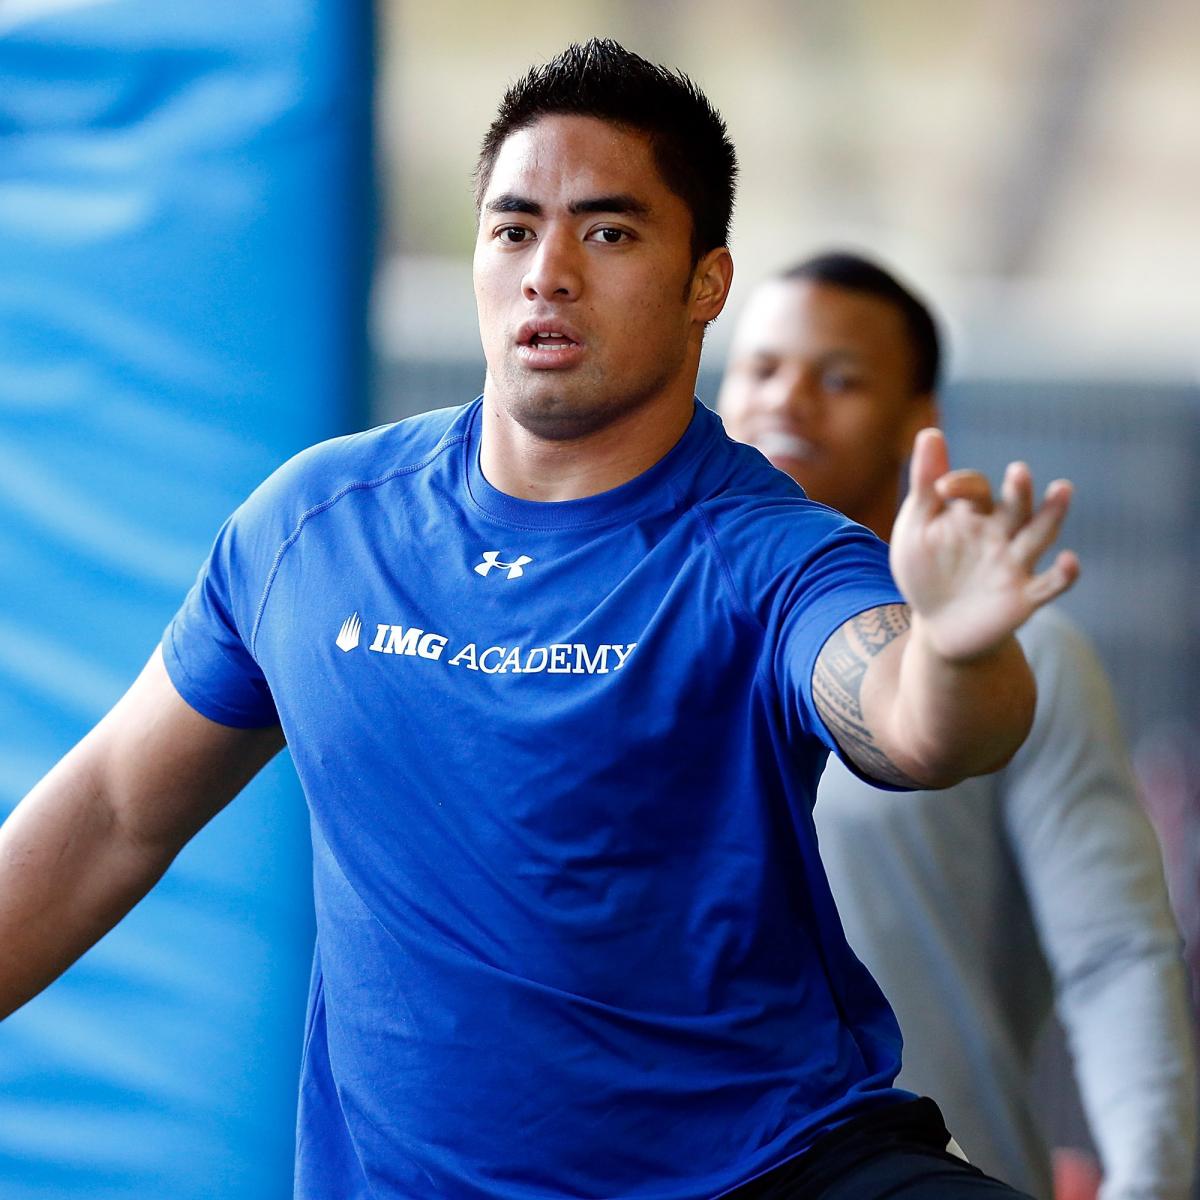 Manti Te'o and Complete List of Jon Gruden 'QB Camp' Participants ...